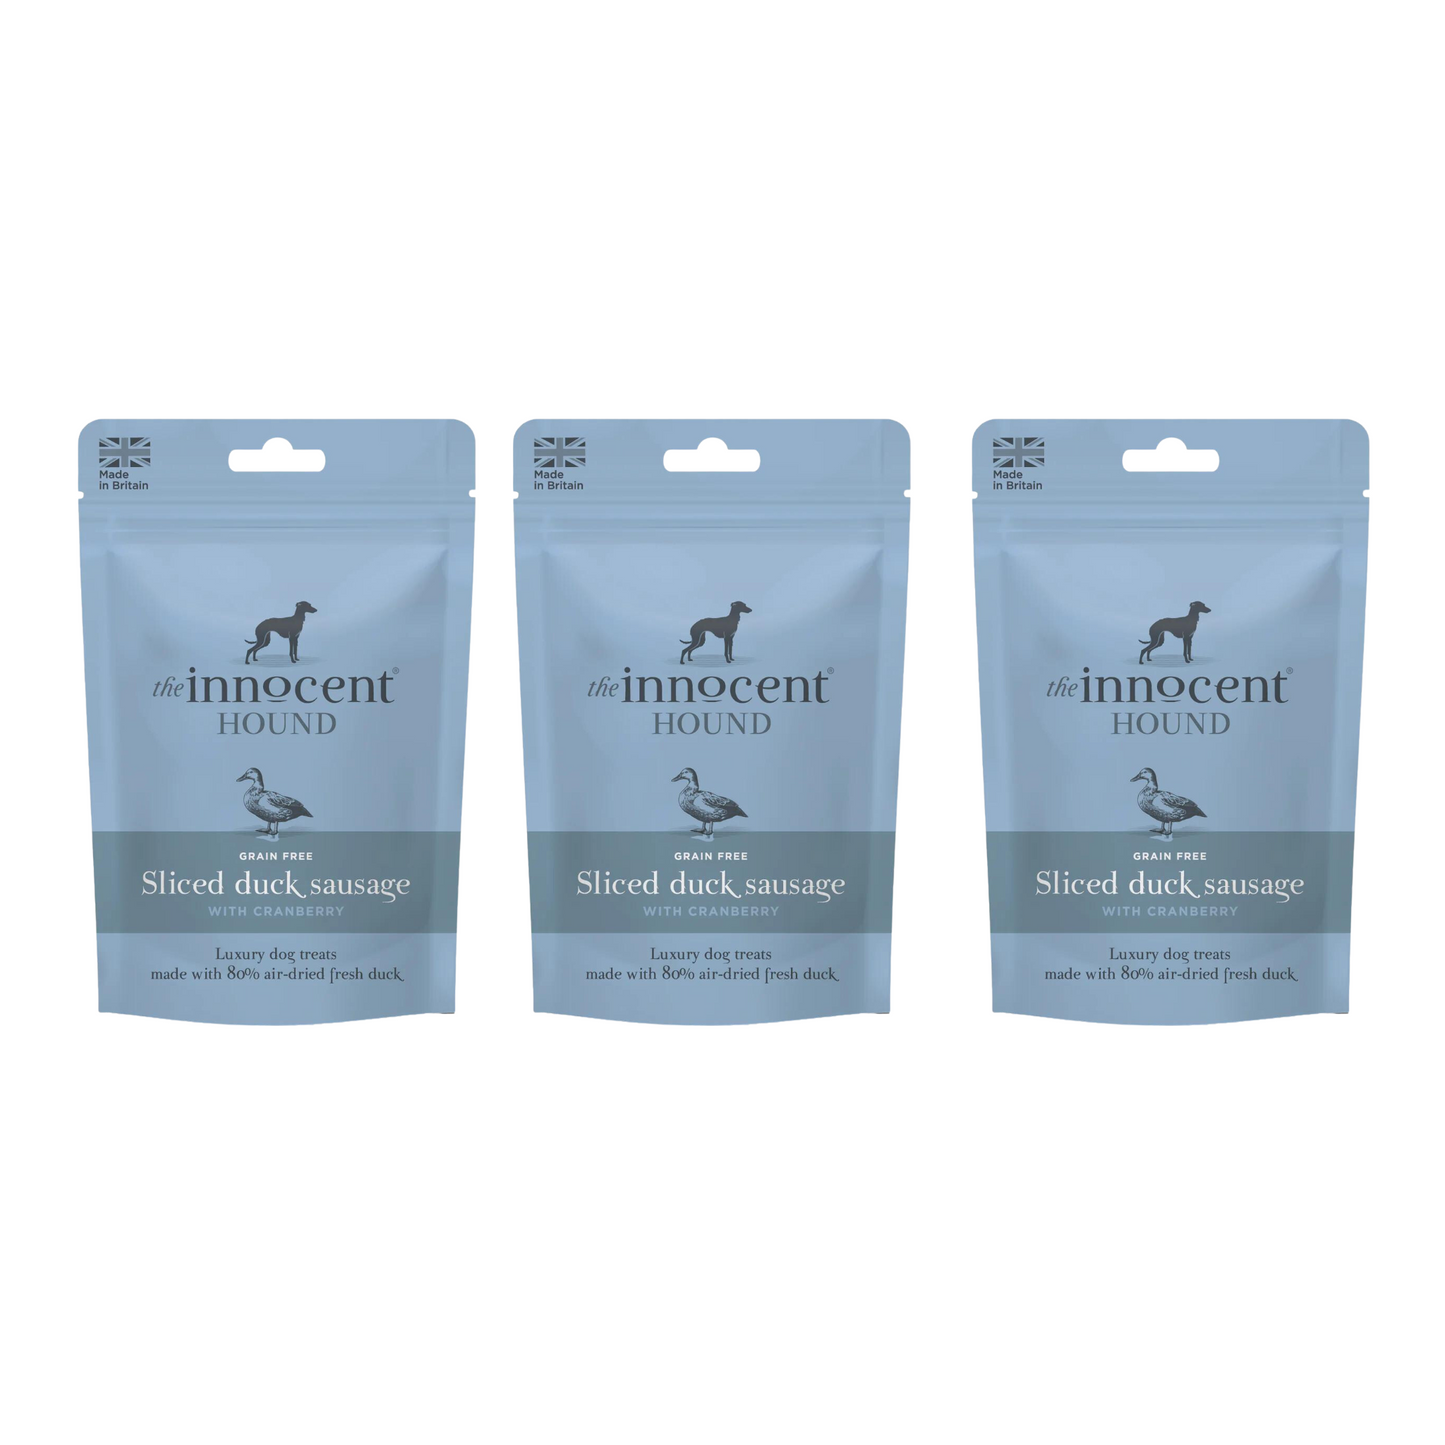 The Innocent Hound Sliced Duck Sausage and Cranberry 70g